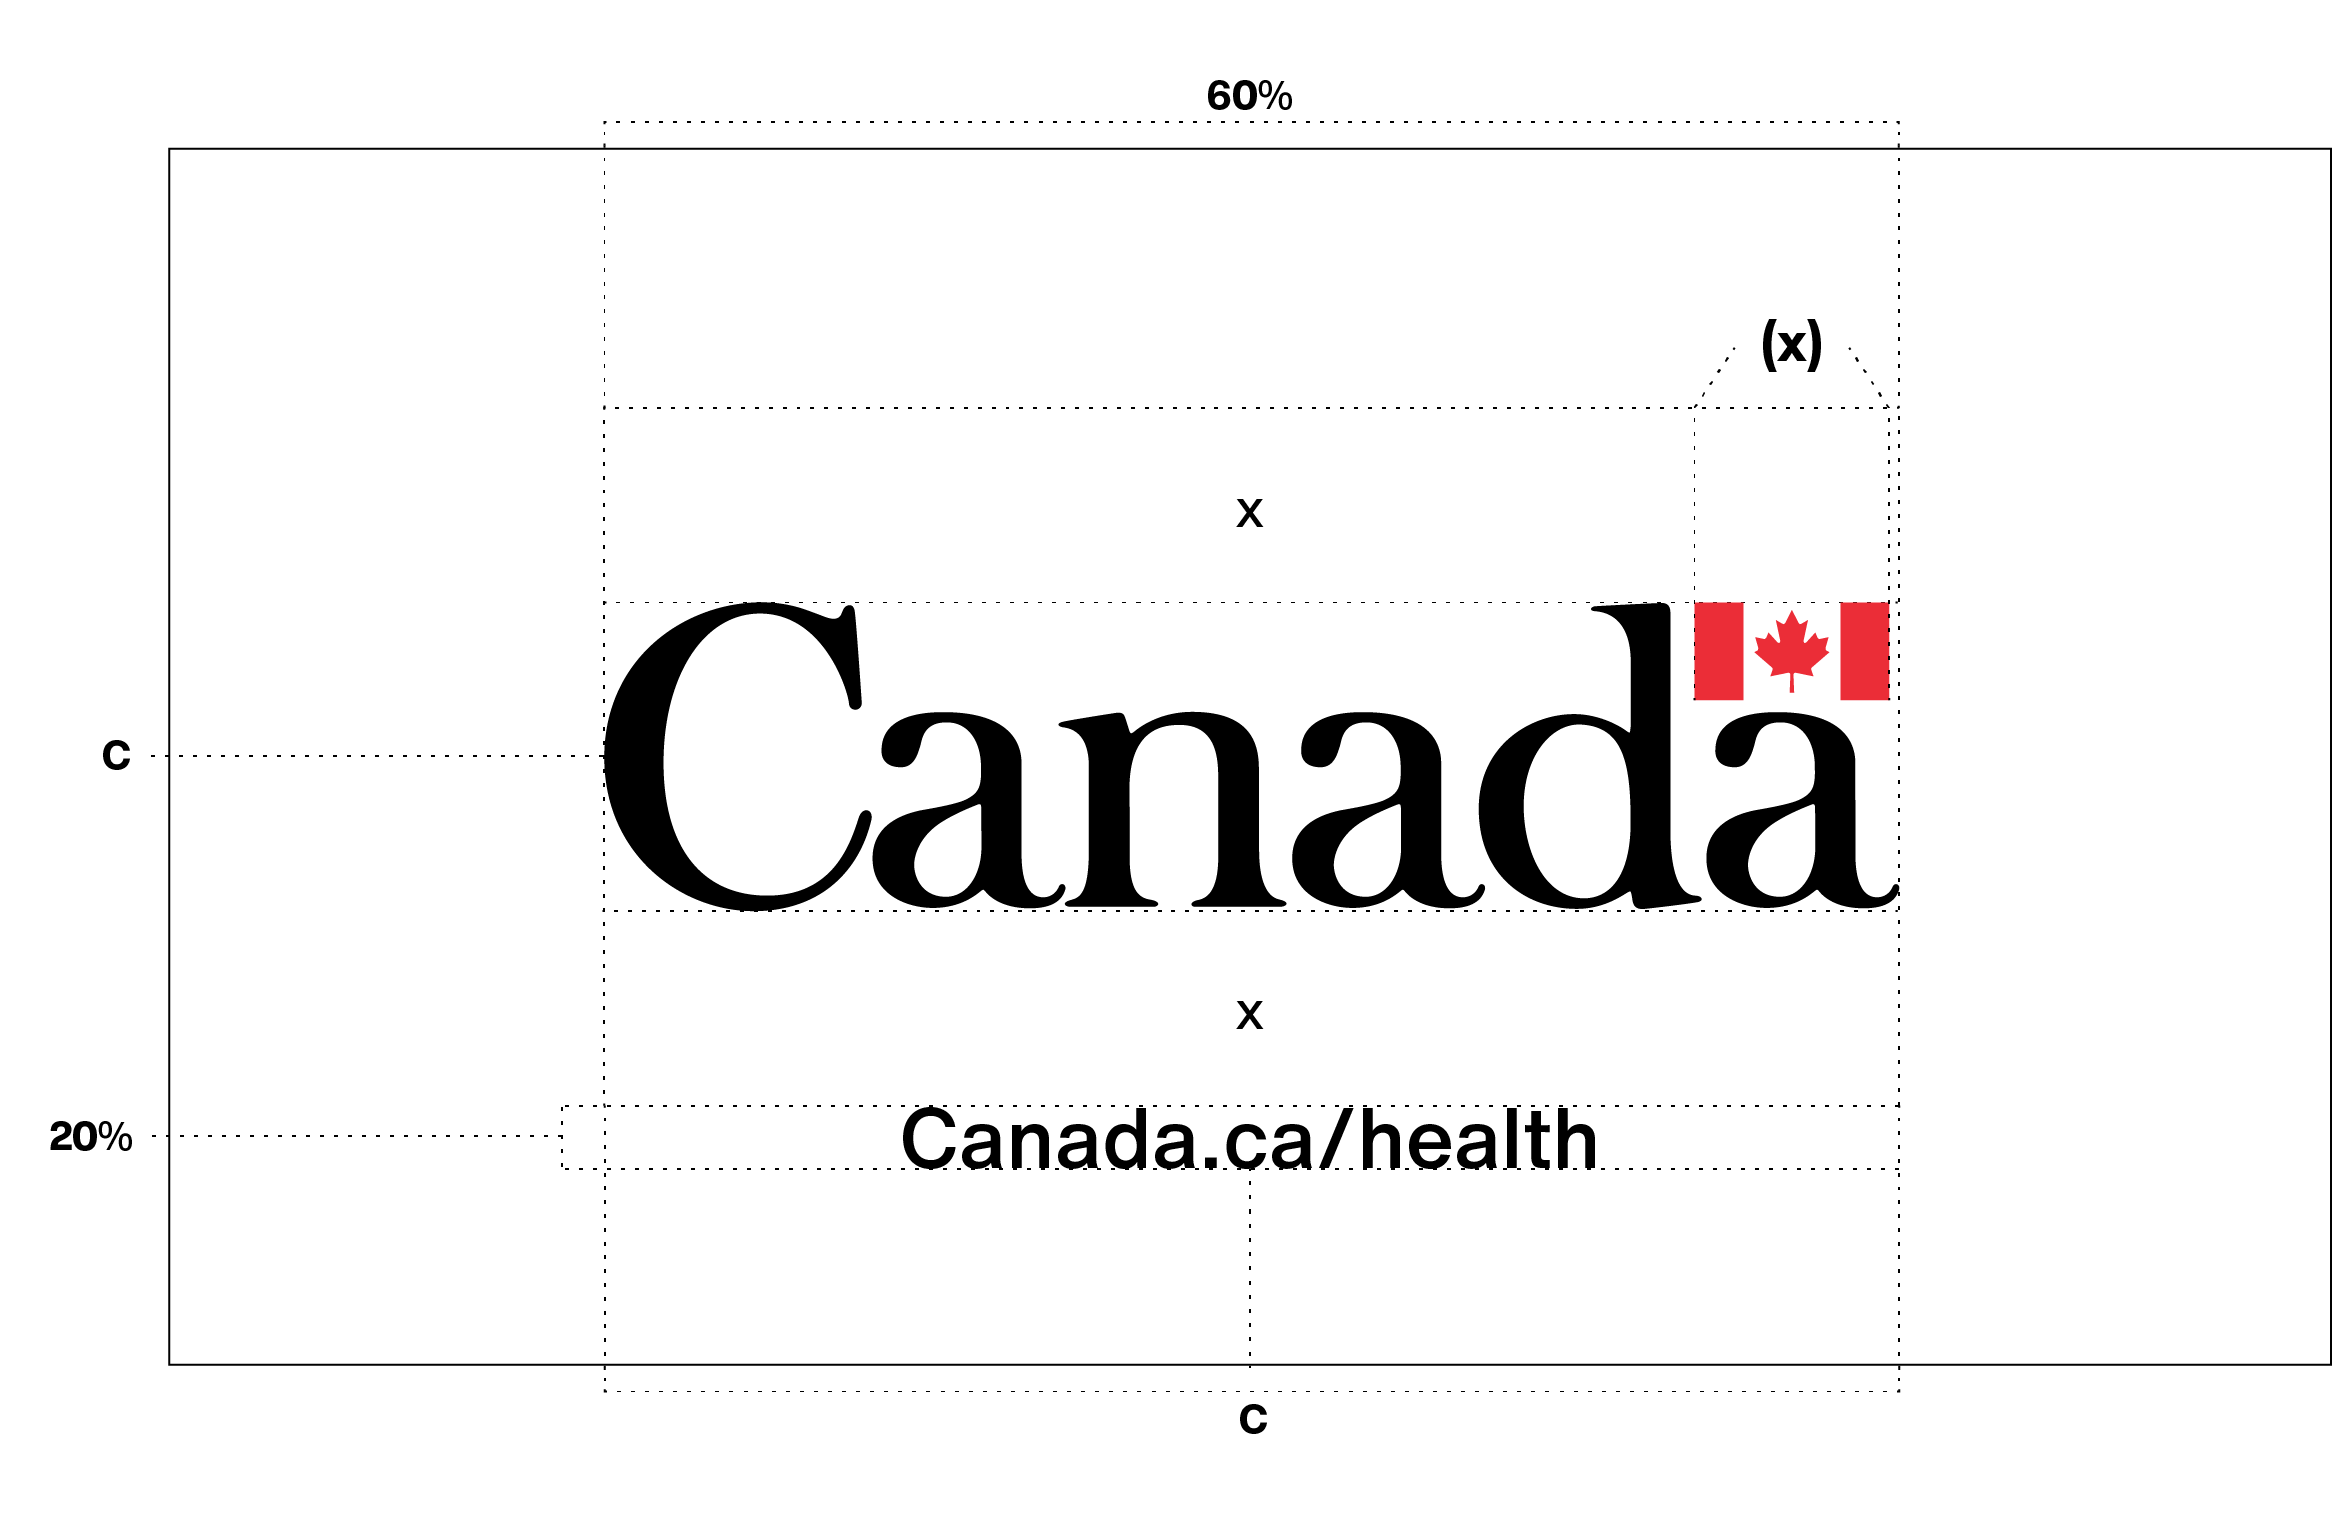 Requirements for the placement of the Canada wordmark and 1 additional message (in this example, a URL) on the end screen of a video ad, as explained in the text above.